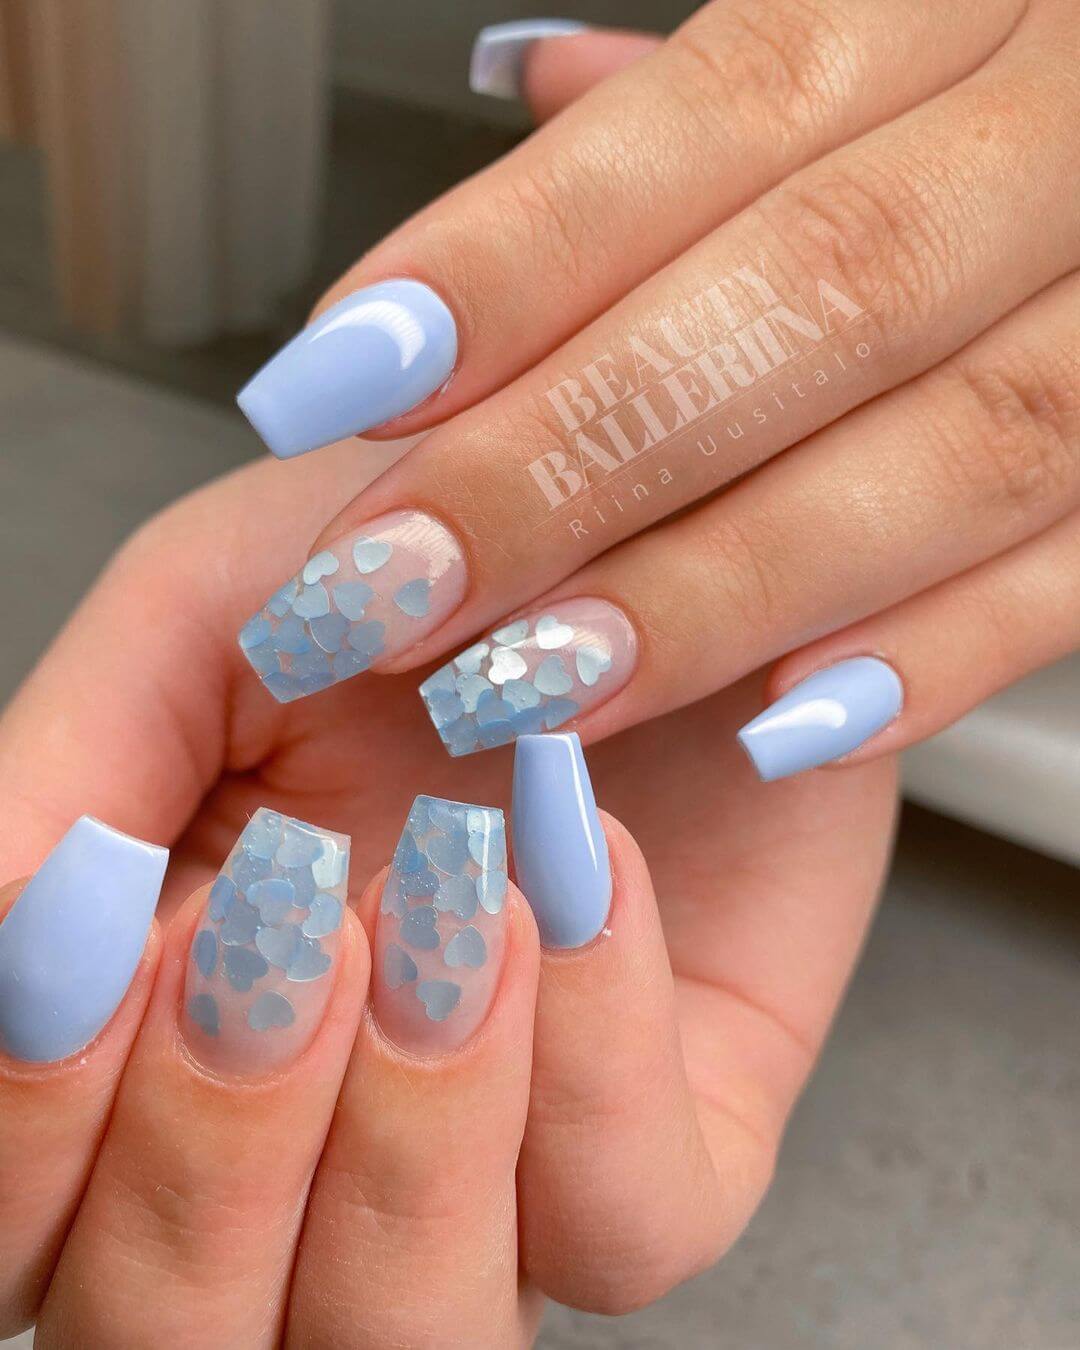 Heart Nail Art Designs Give thought to Ice blue colour